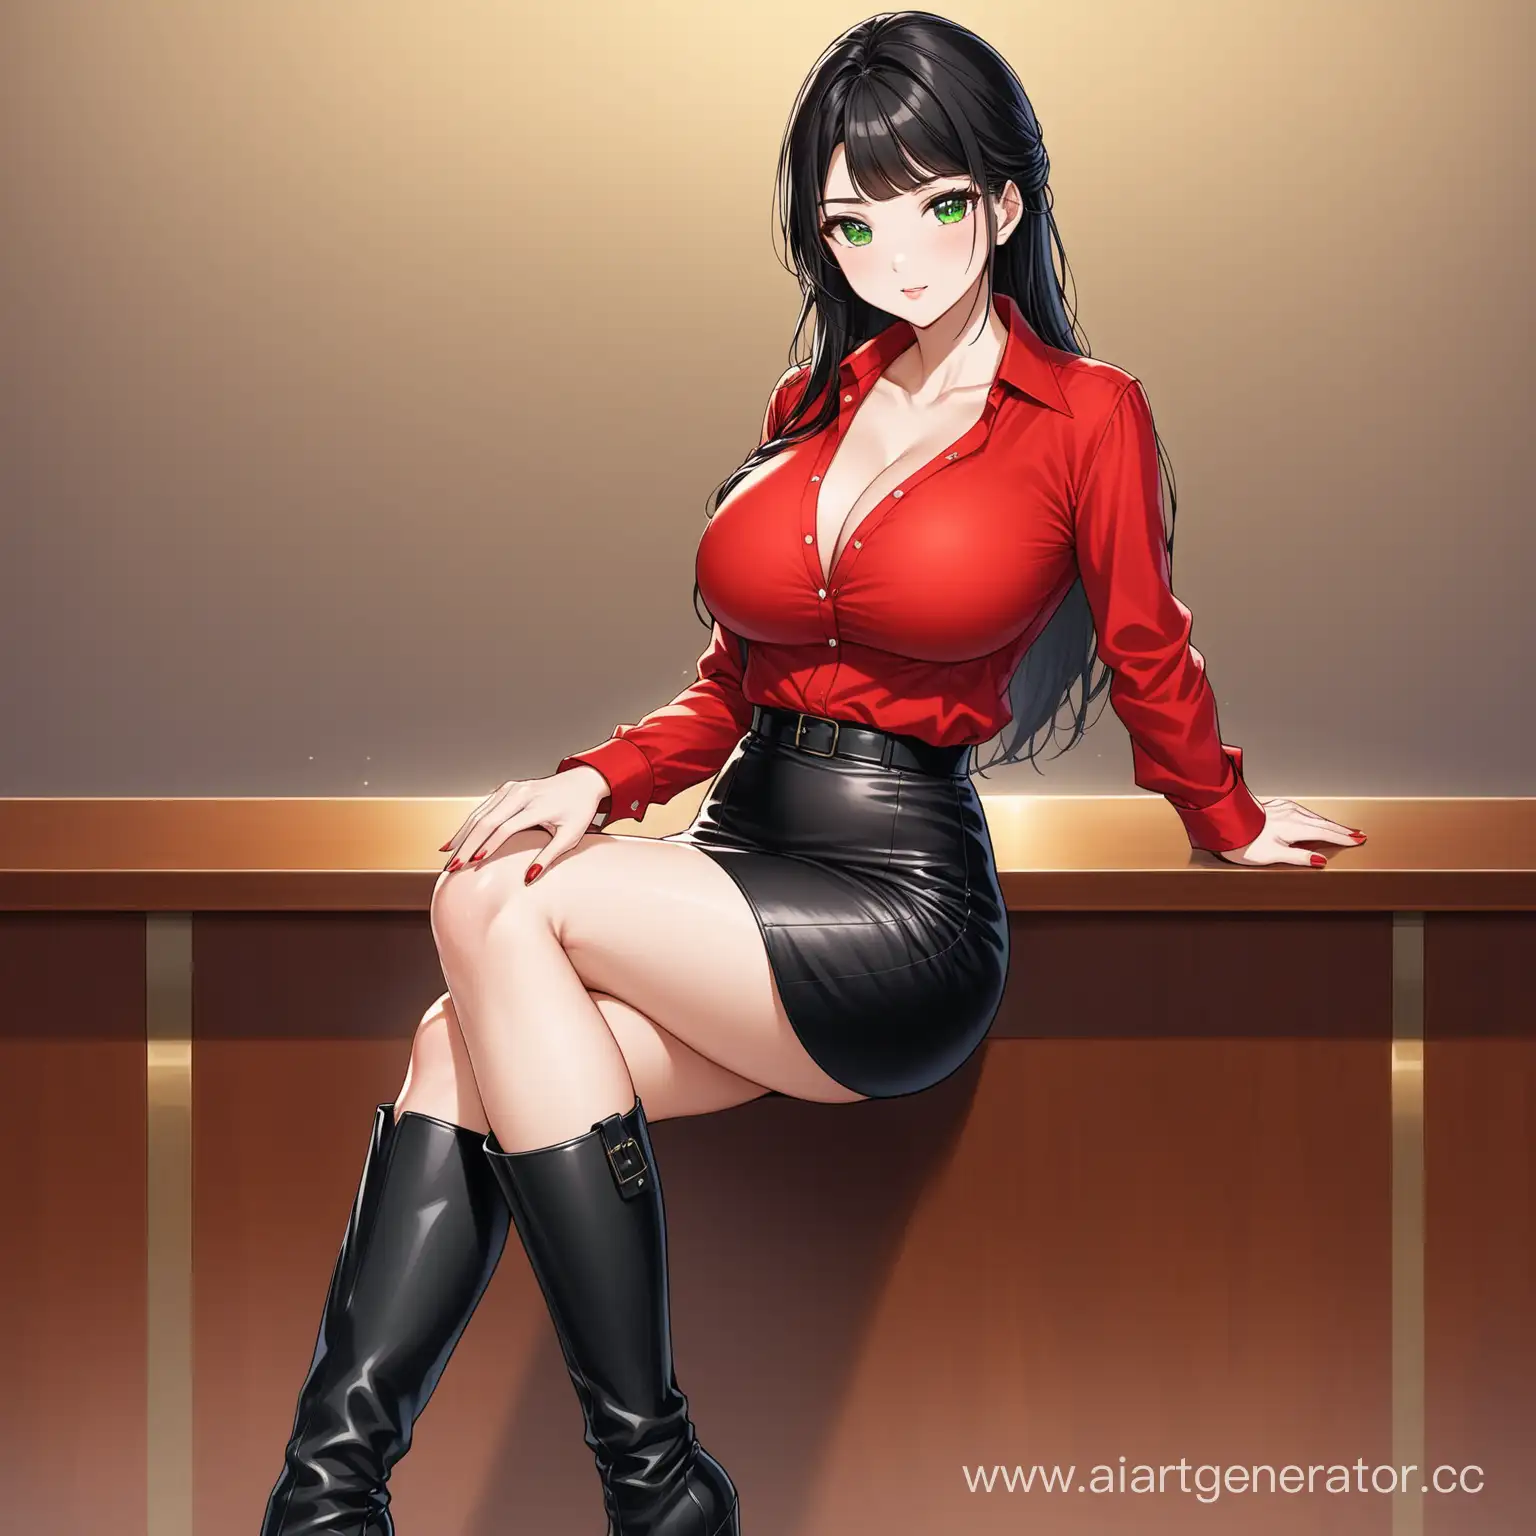 Classic-Red-Shirt-Girl-with-Black-Skirt-and-KneeHigh-Boots